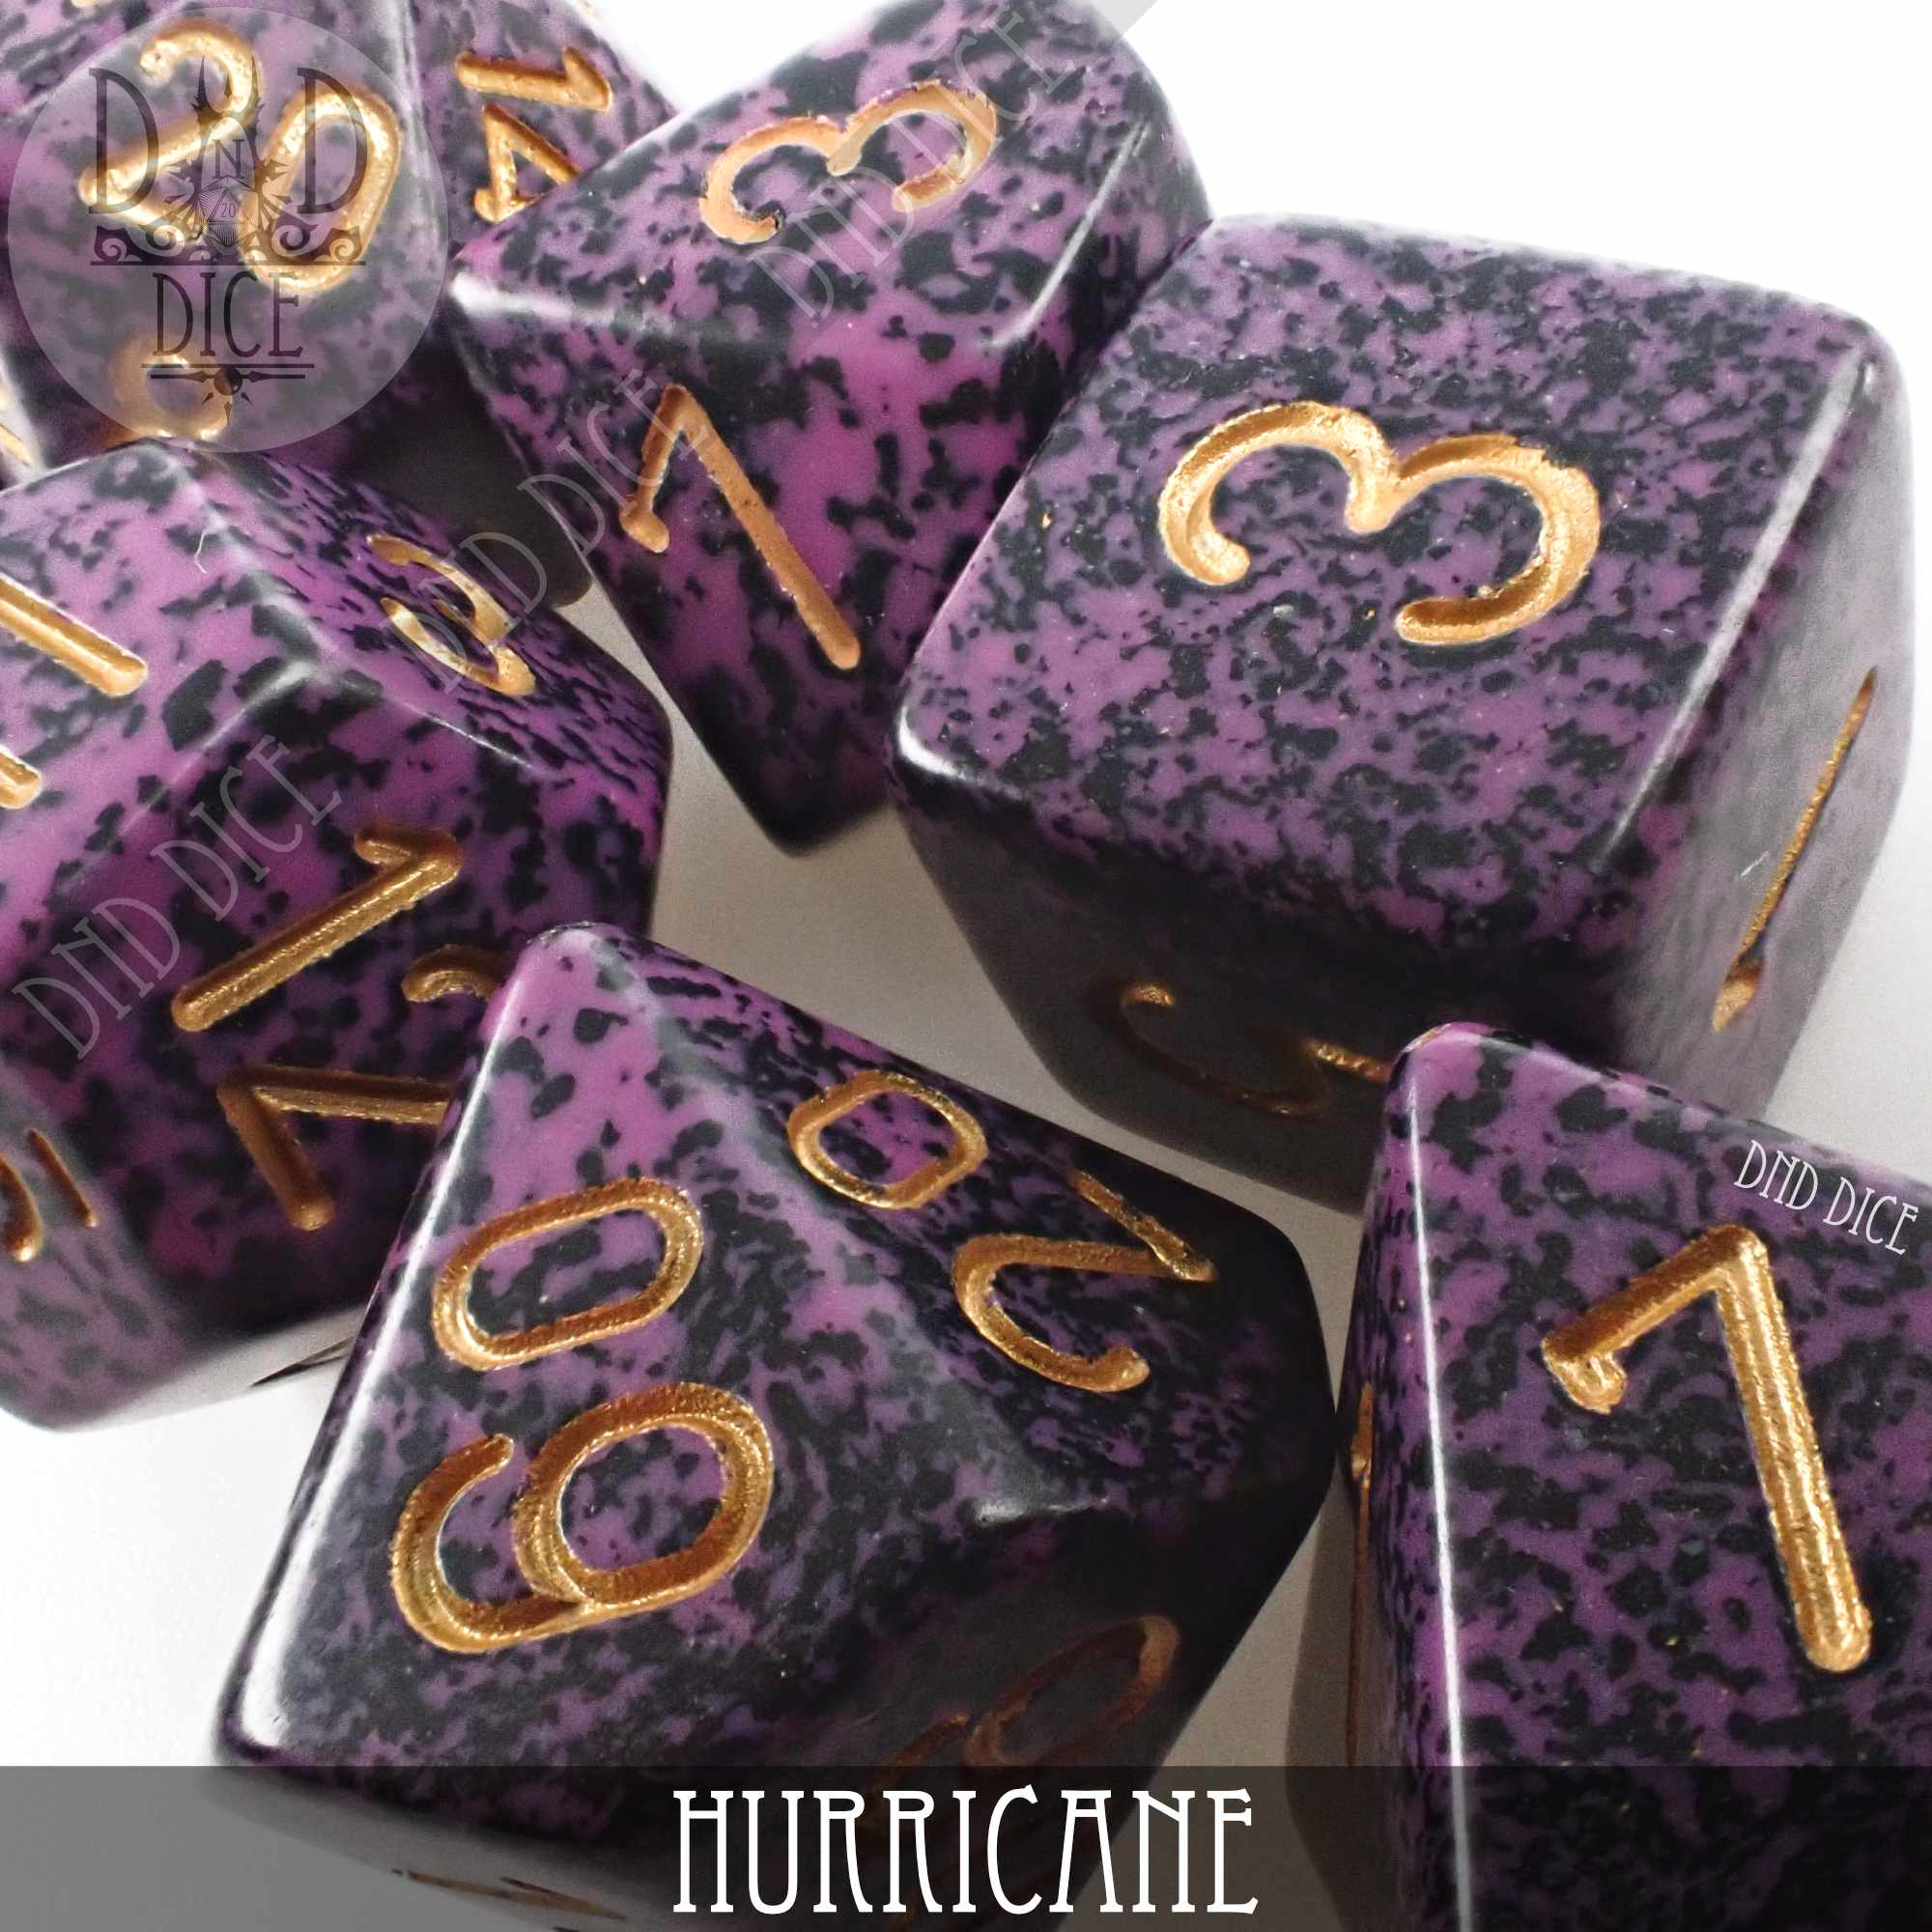 Hurricane Build Your Own Set